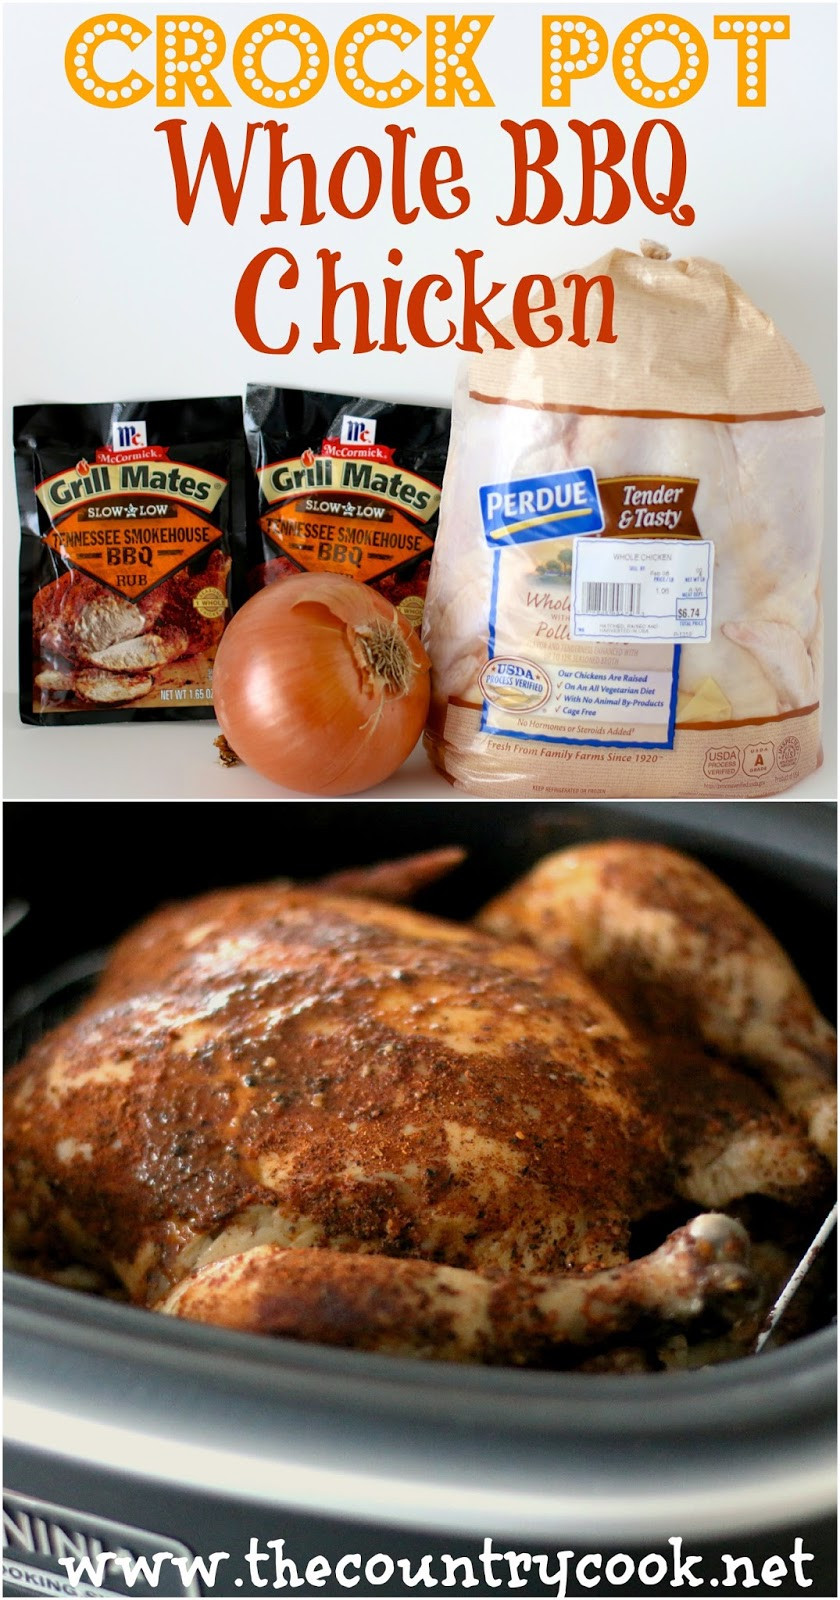 Crockpot Whole Chicken Recipe
 The Country Cook Crock Pot Whole BBQ Chicken